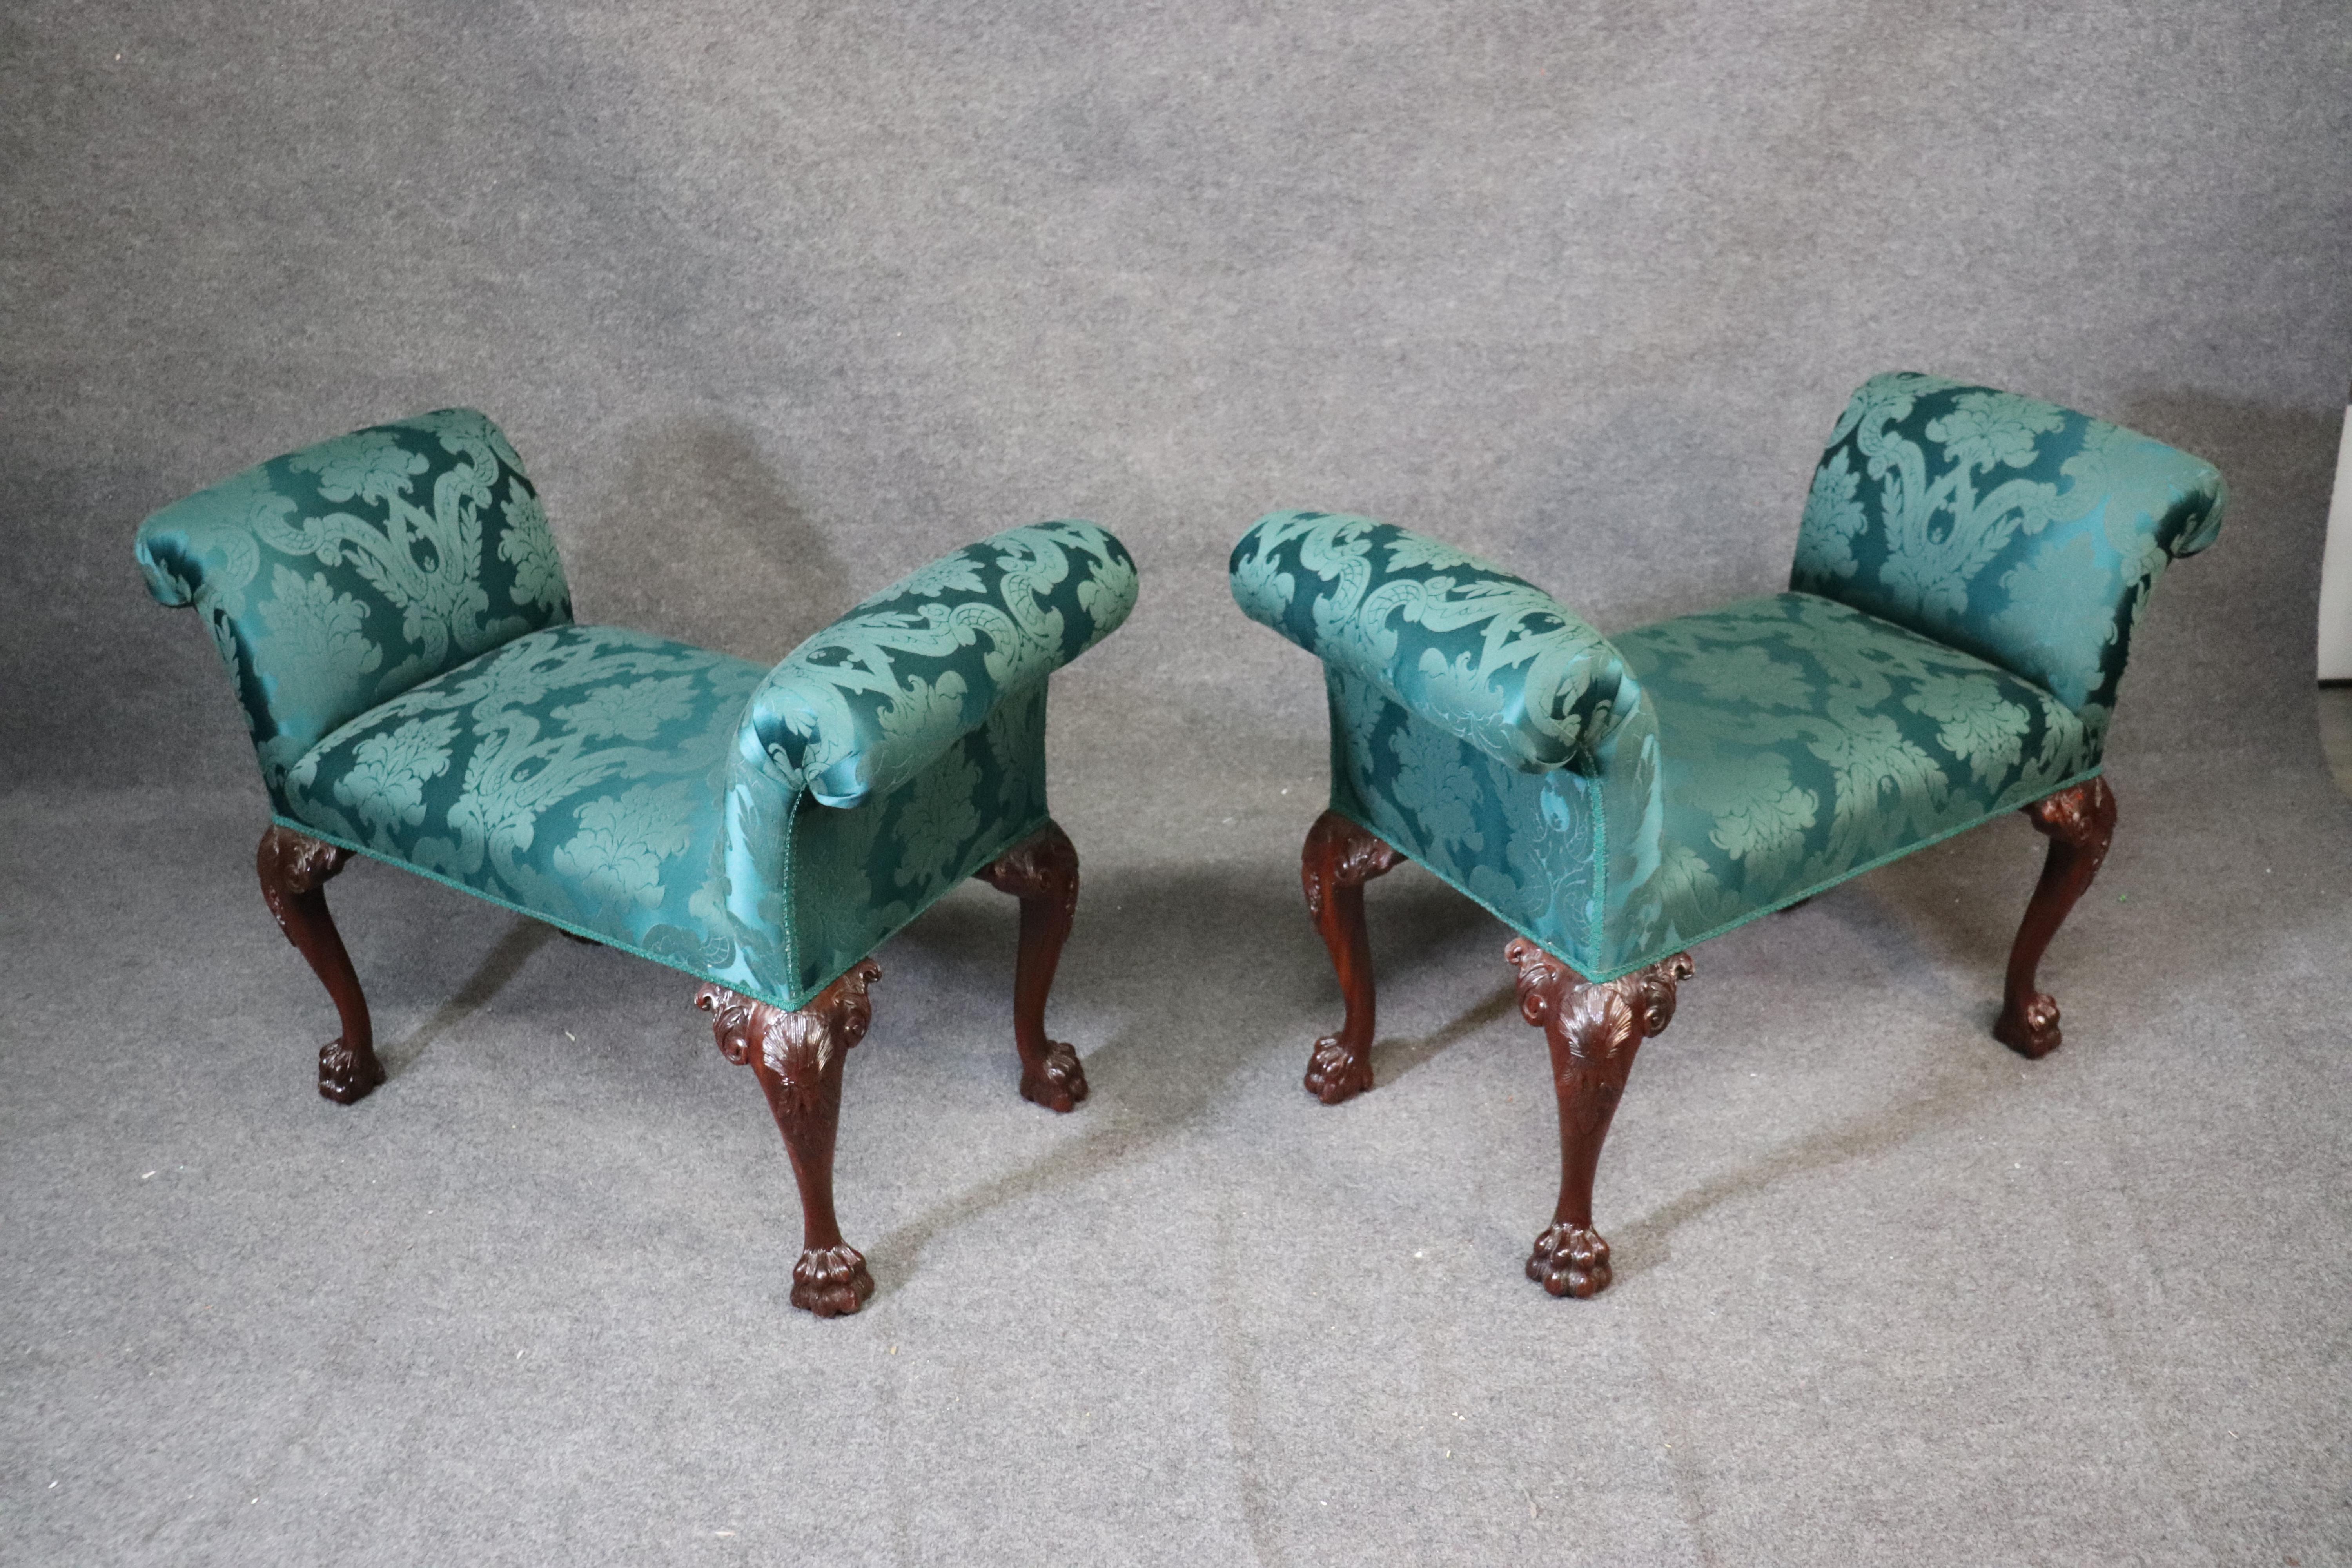 These stools are beautifully carved and feature beautiful green damask upholstery. They each measure: 29 tall x 41 wide x 17 deep. The seat height is 20 inches. They are from the 1960s era.